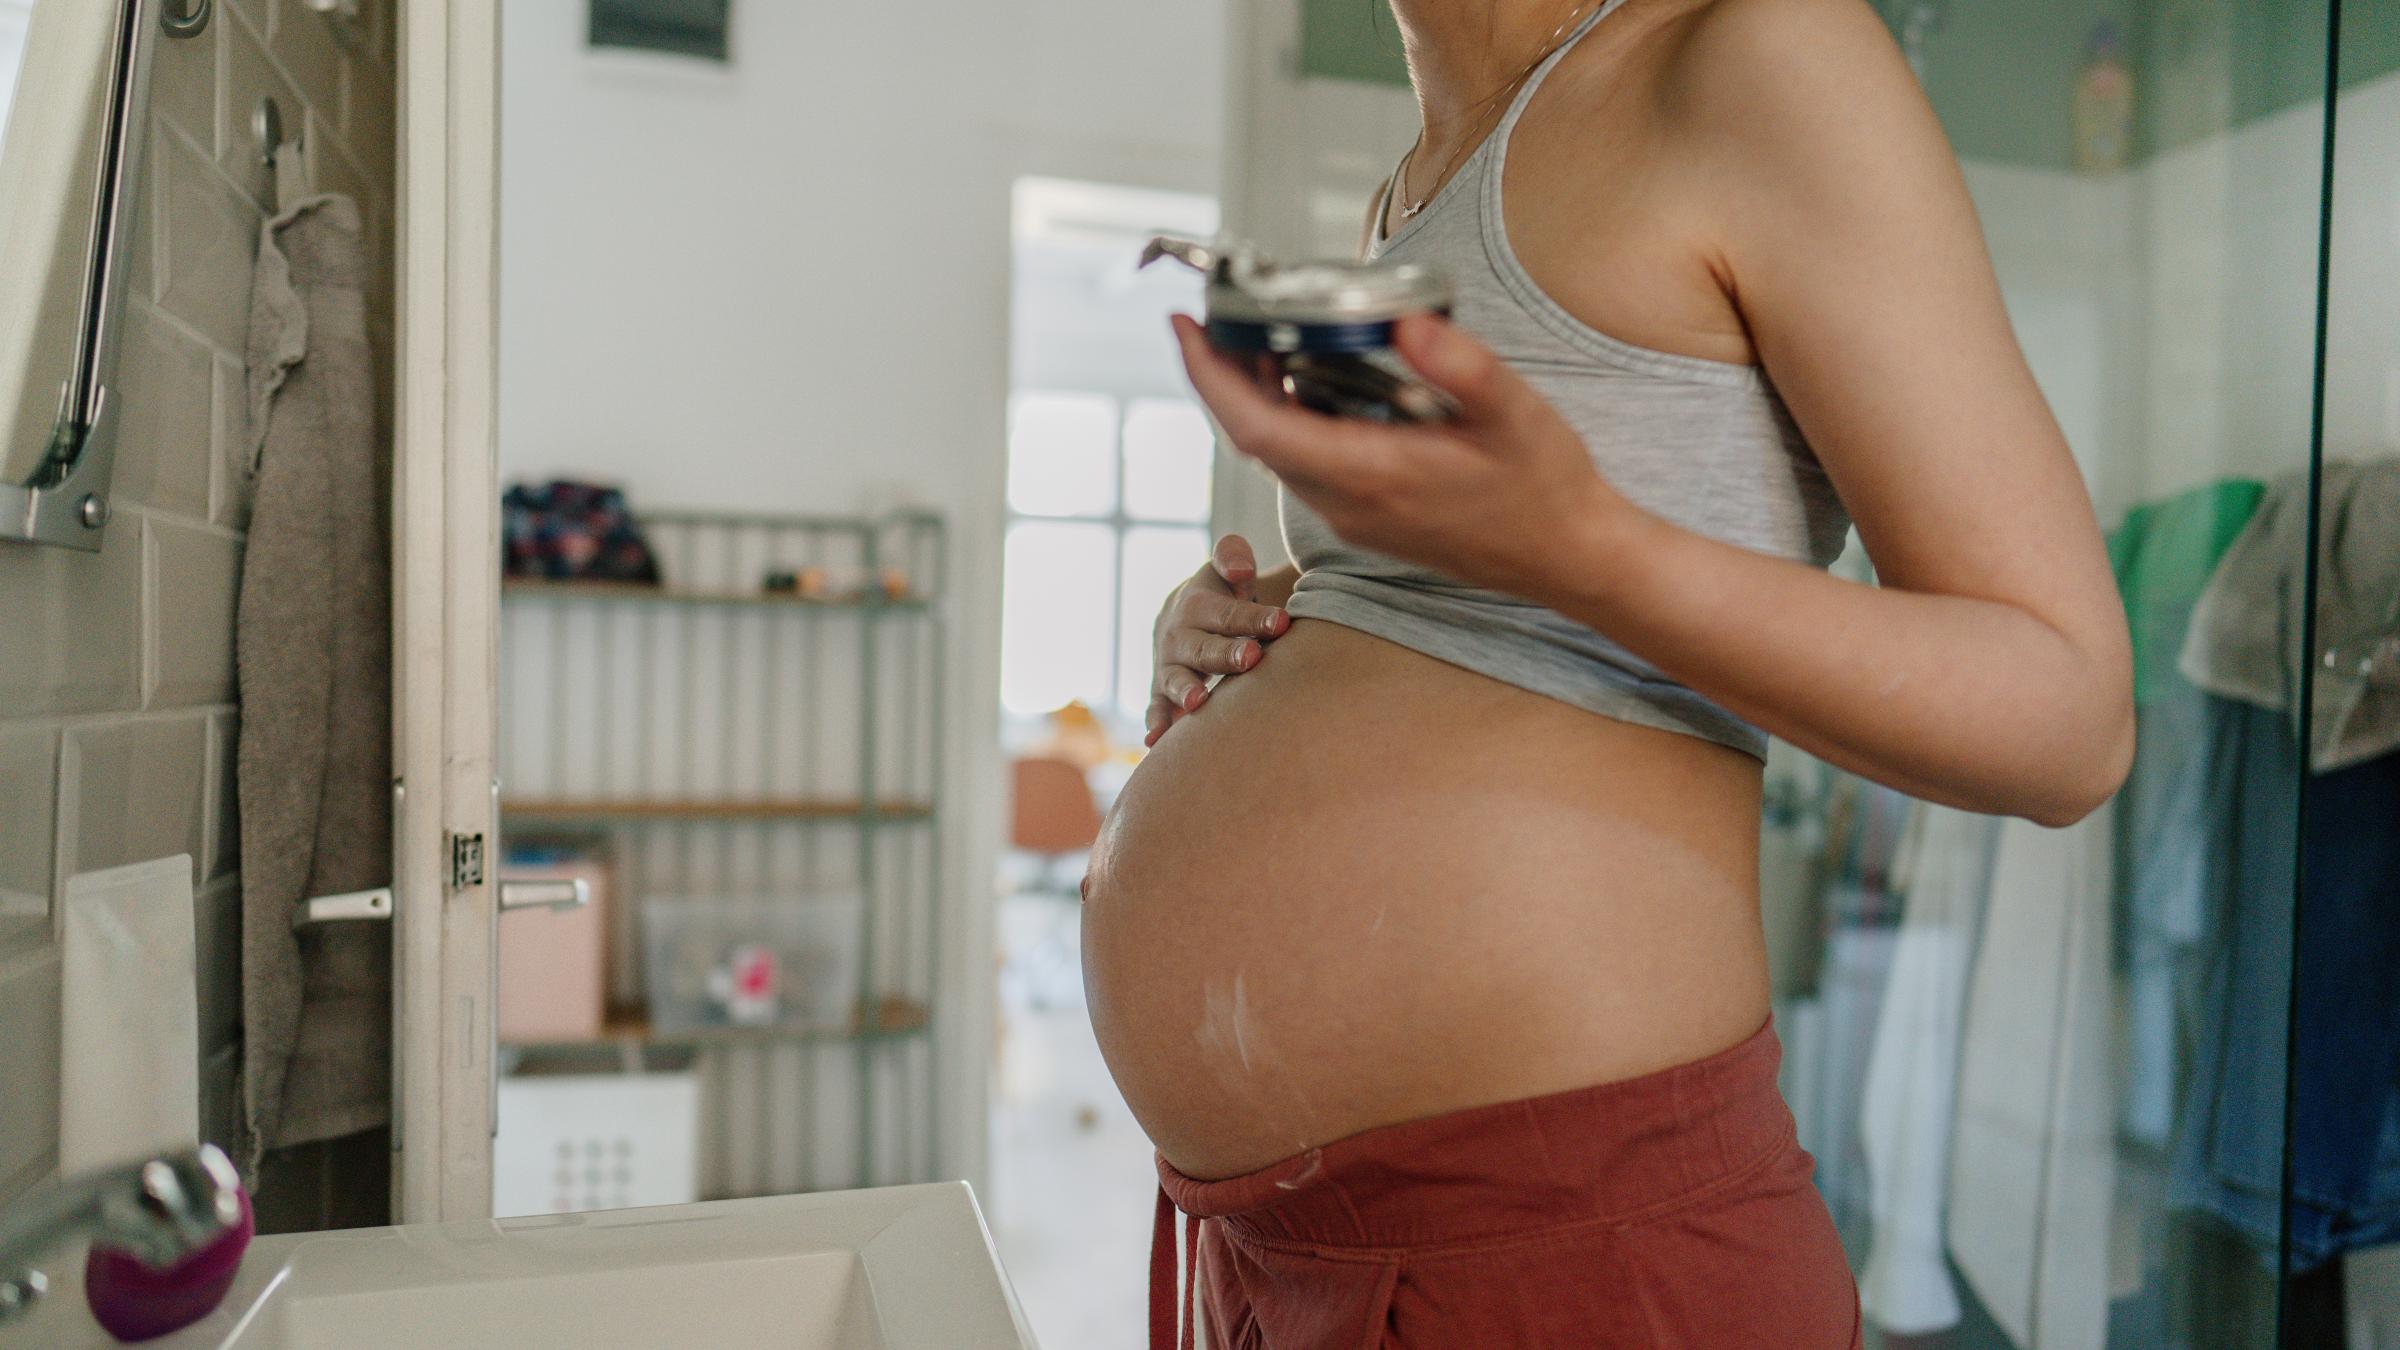 A pregnant woman standing in a bathroom rubbing topical cream onto her stomach